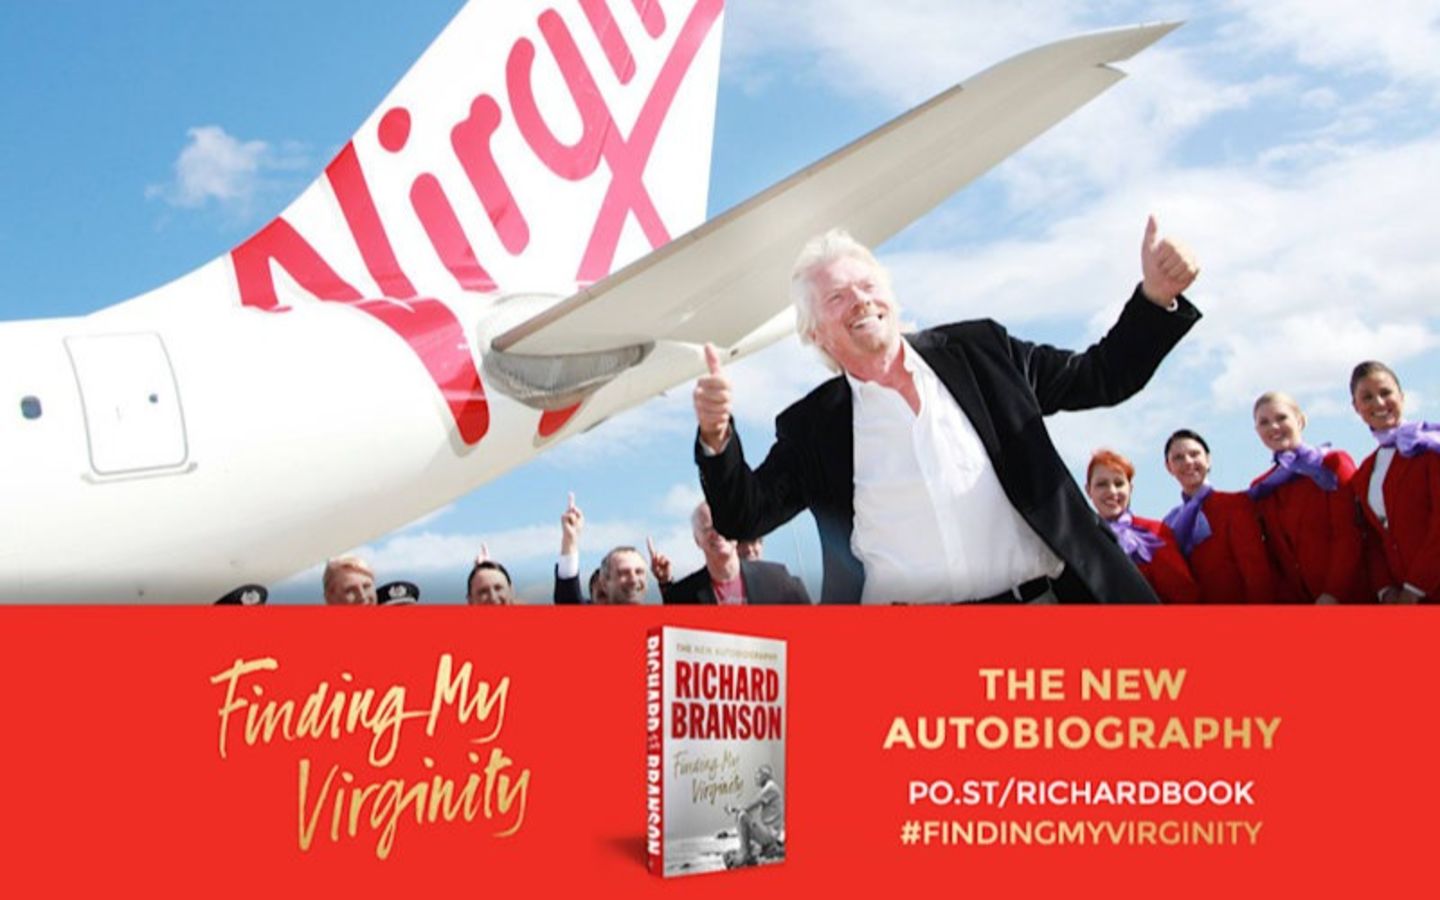 Richard Branson with a Virgin plane in the background with the book title at the bottom "Finding My Virginity"